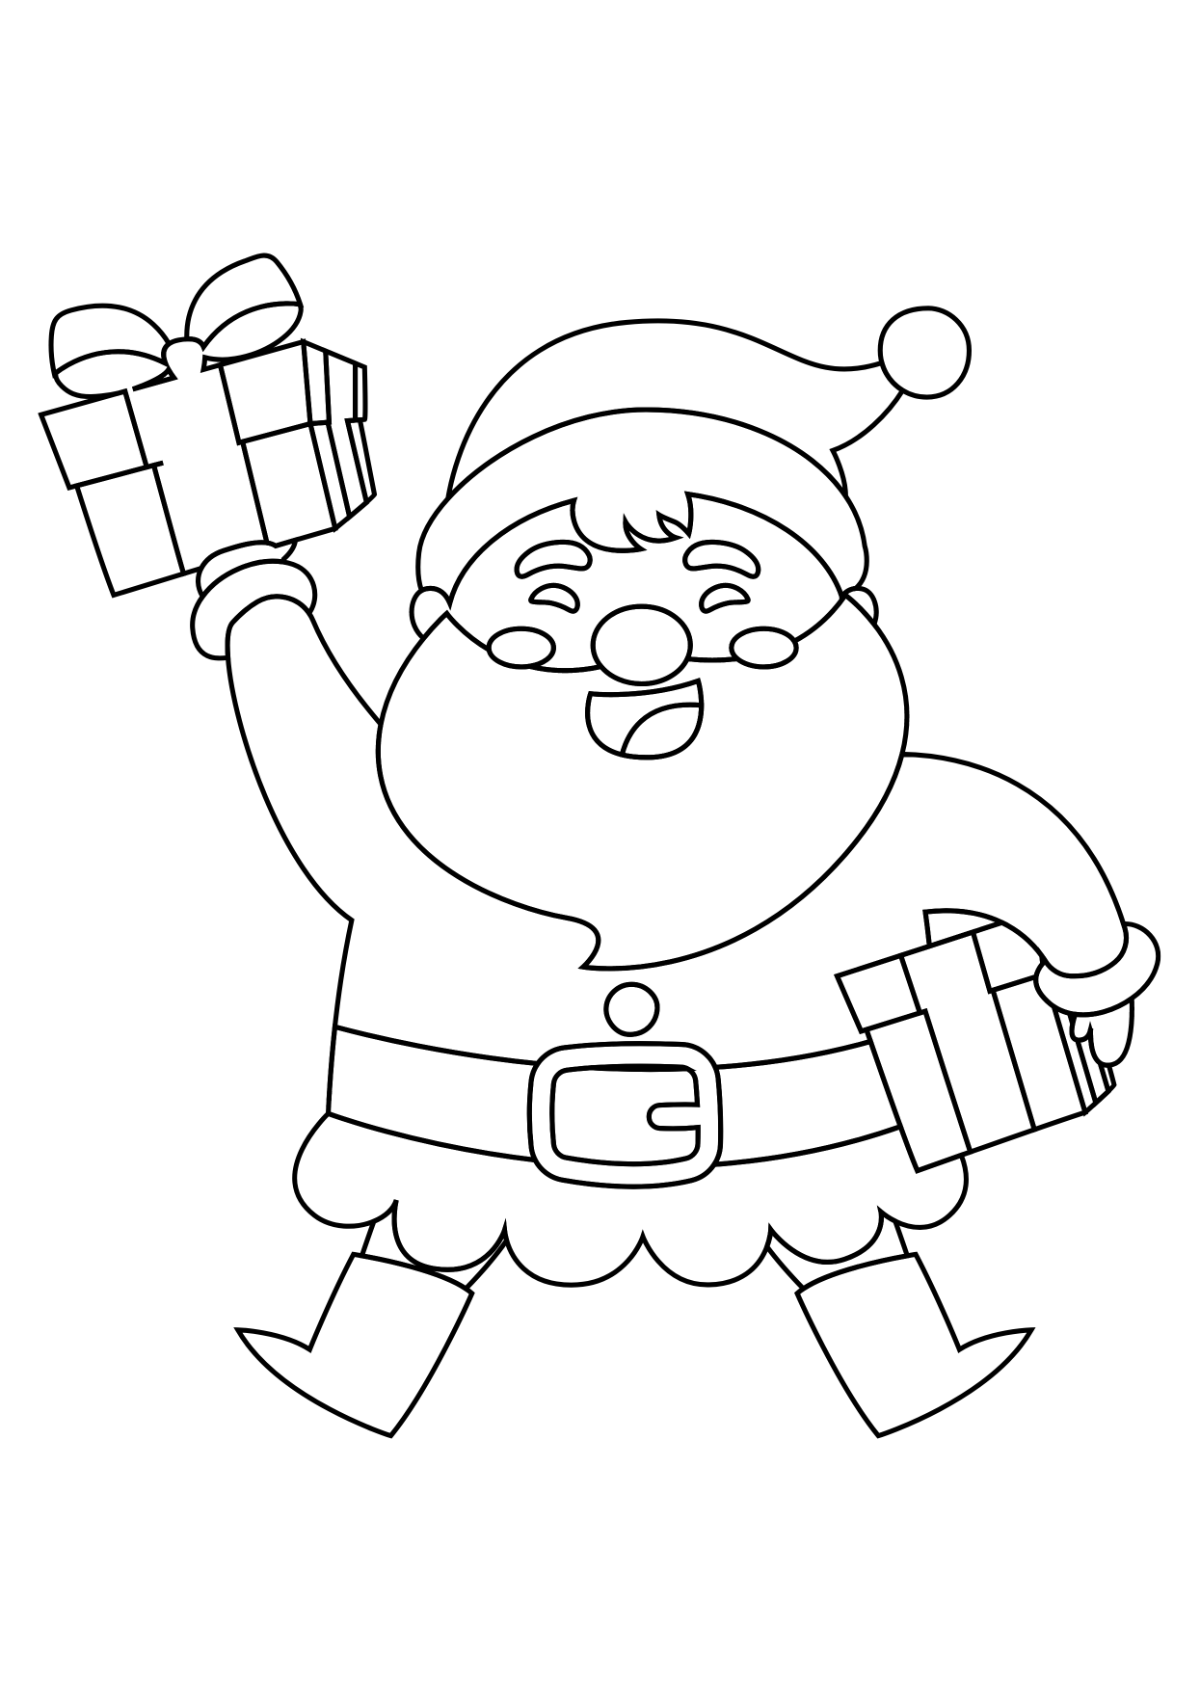 Easy and Beautiful Christmas Drawings and Art Ideas for Kids